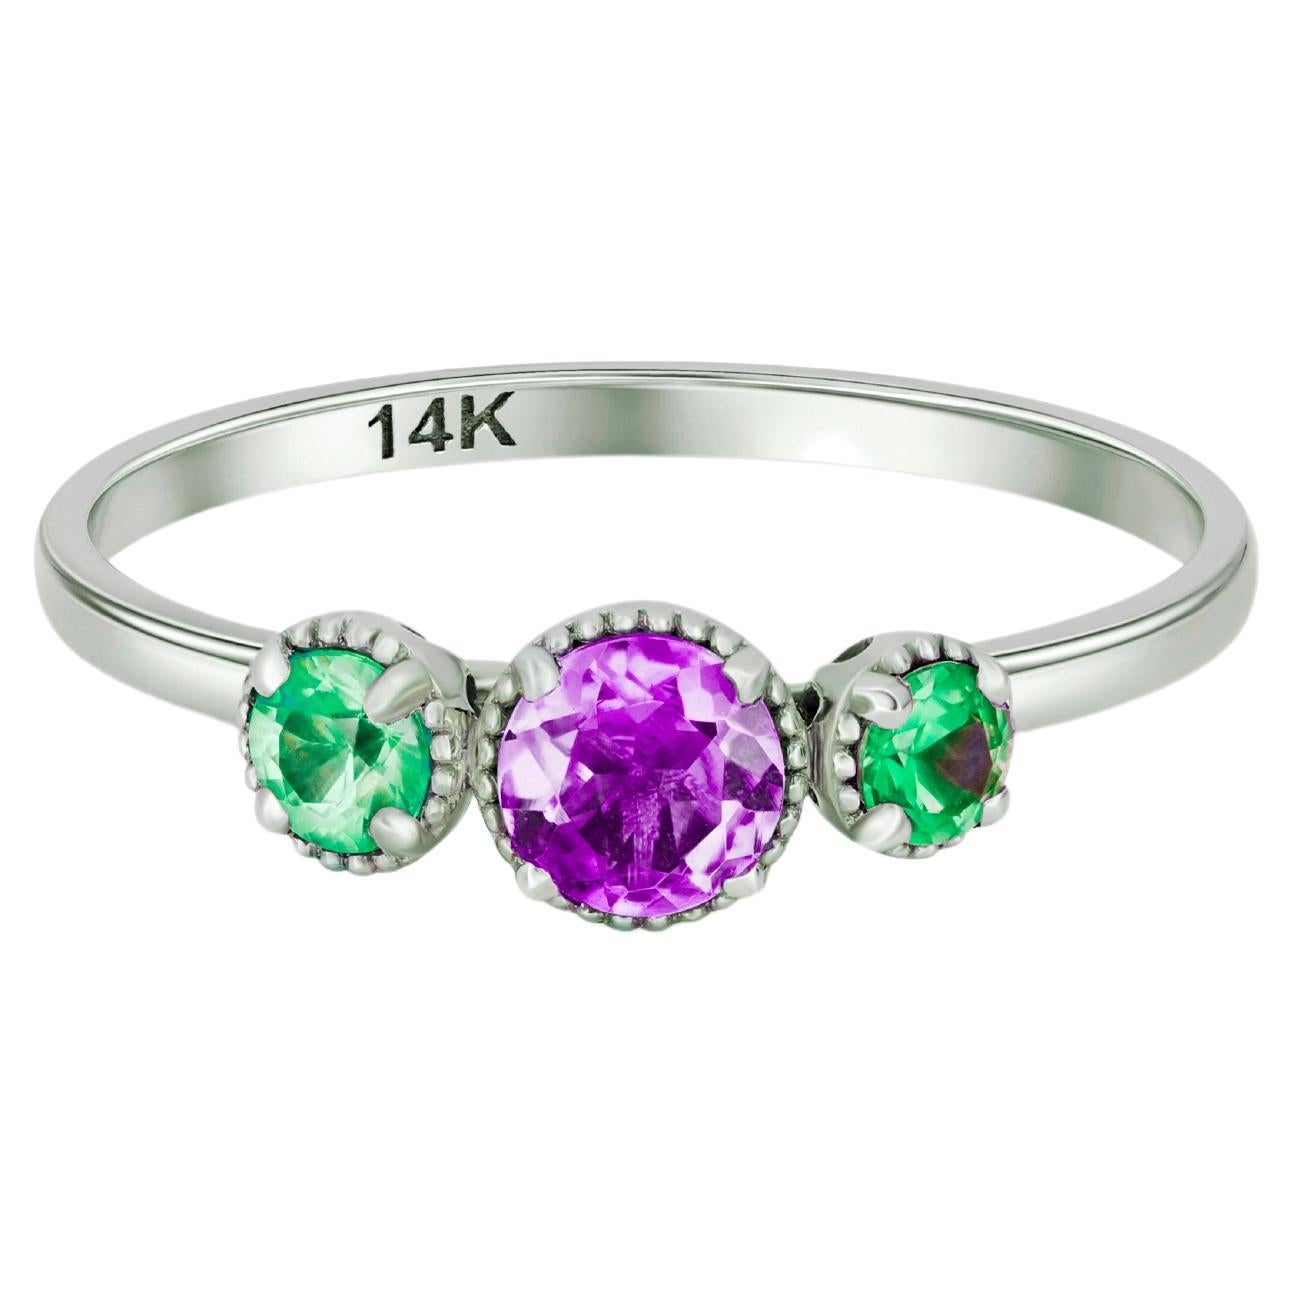 For Sale:  Green and purple gem 14k gold ring.